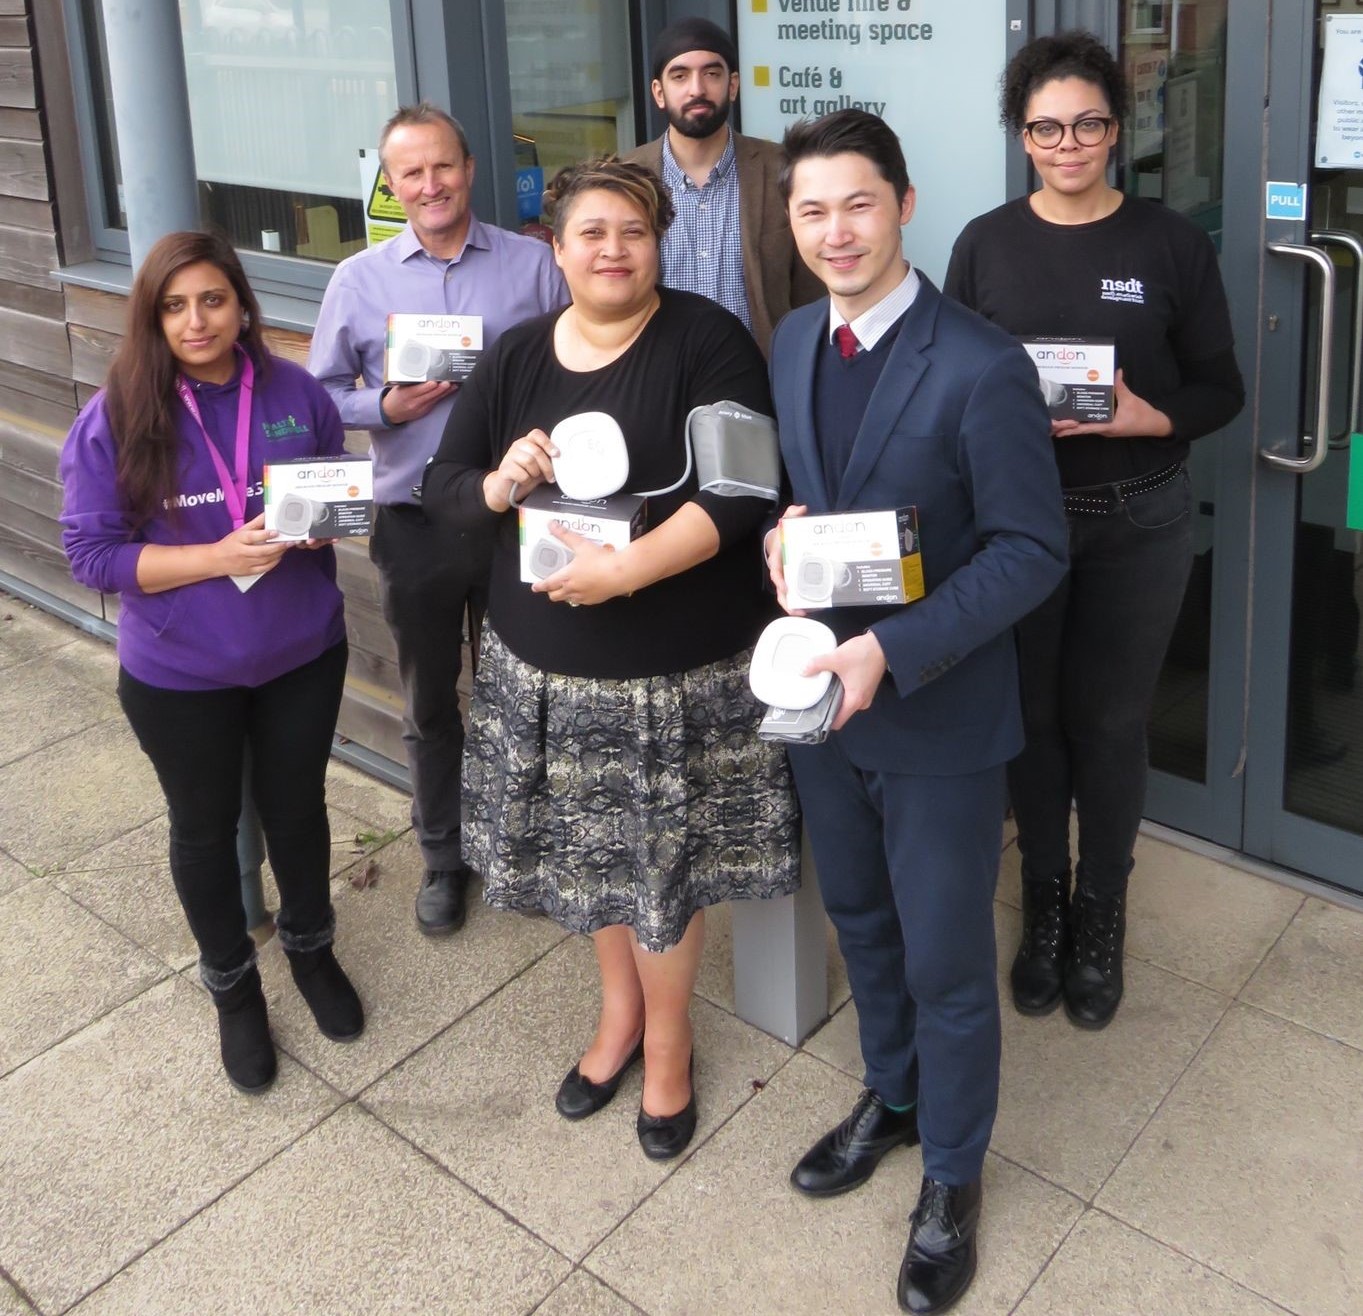 L-R Nasmin Hussain from Sandwell Council, Simon Hall from the WMCA, Jenn Harrison from North Smethwick Development Trust, Irandeep Mann from Sandwell Council, Charles Lu from Super Smart Service Ltd and Liane Smith from North Smethwick Development Trust